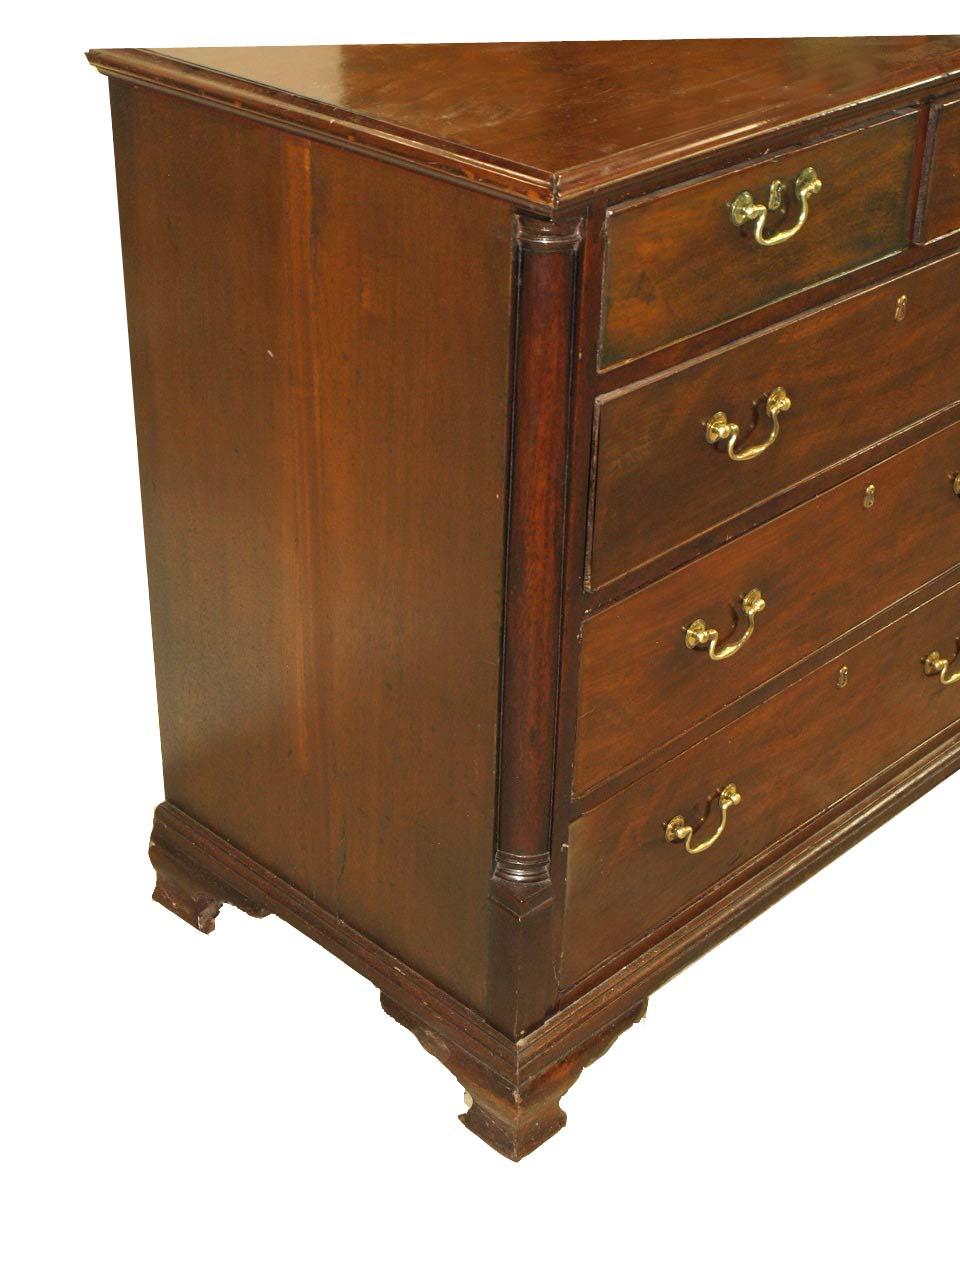 18th century Chippendale chest, the top has beautiful grain( minor ink stains, see photo) , the two over three graduated drawers retain their original swan neck handles, secondary wood is oak. The front corners feature an inset convex quarter column